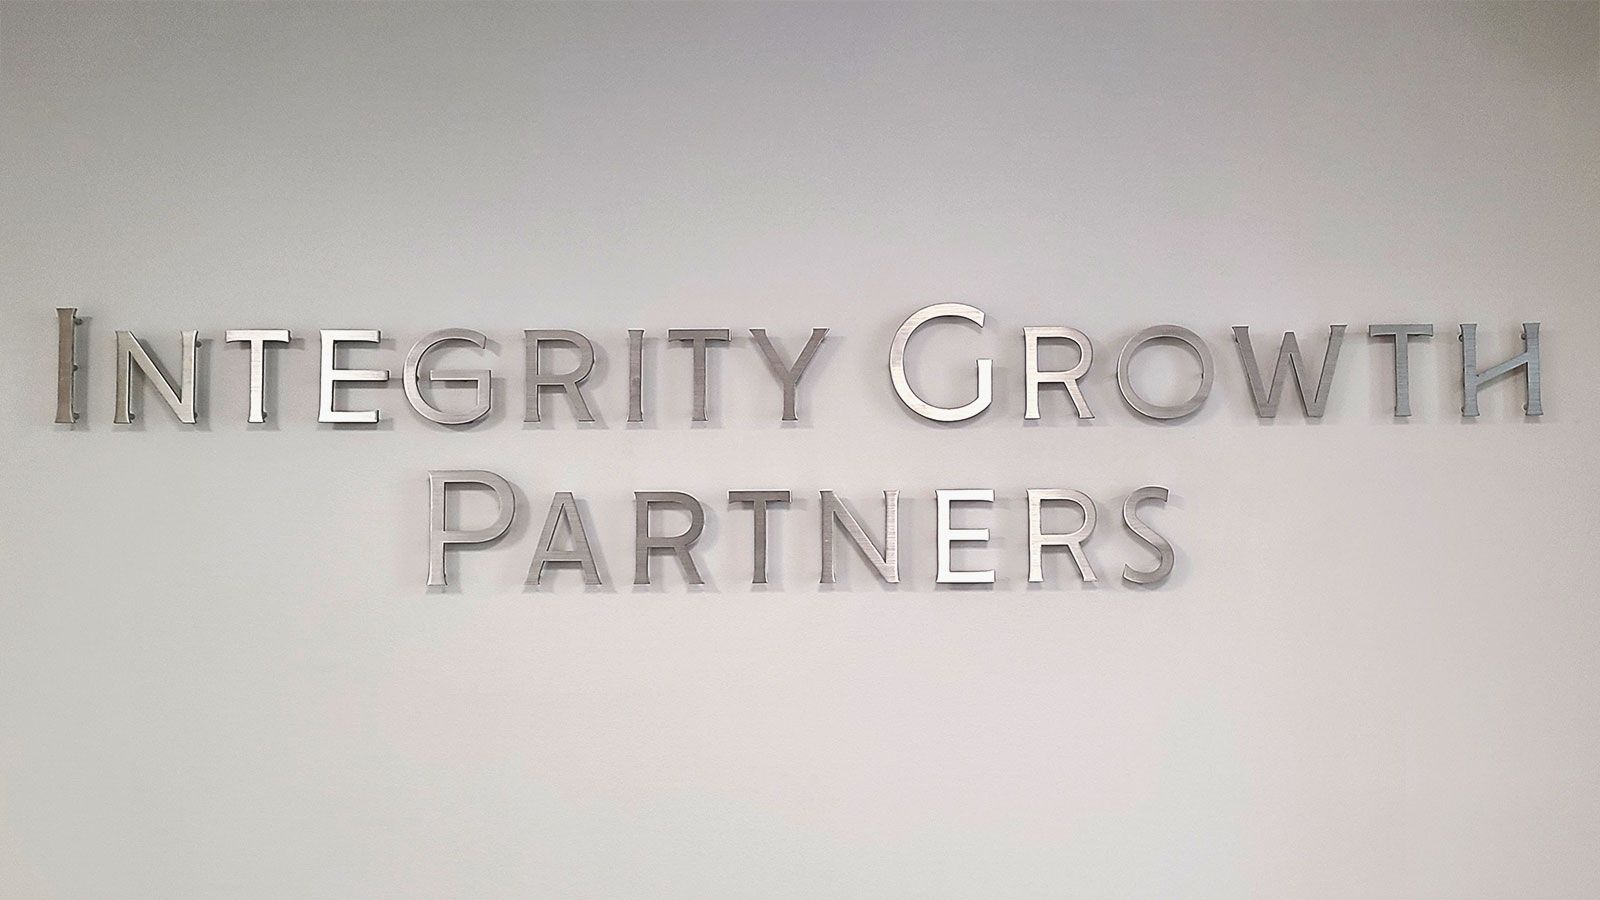 Integrity growth partners 3D letters